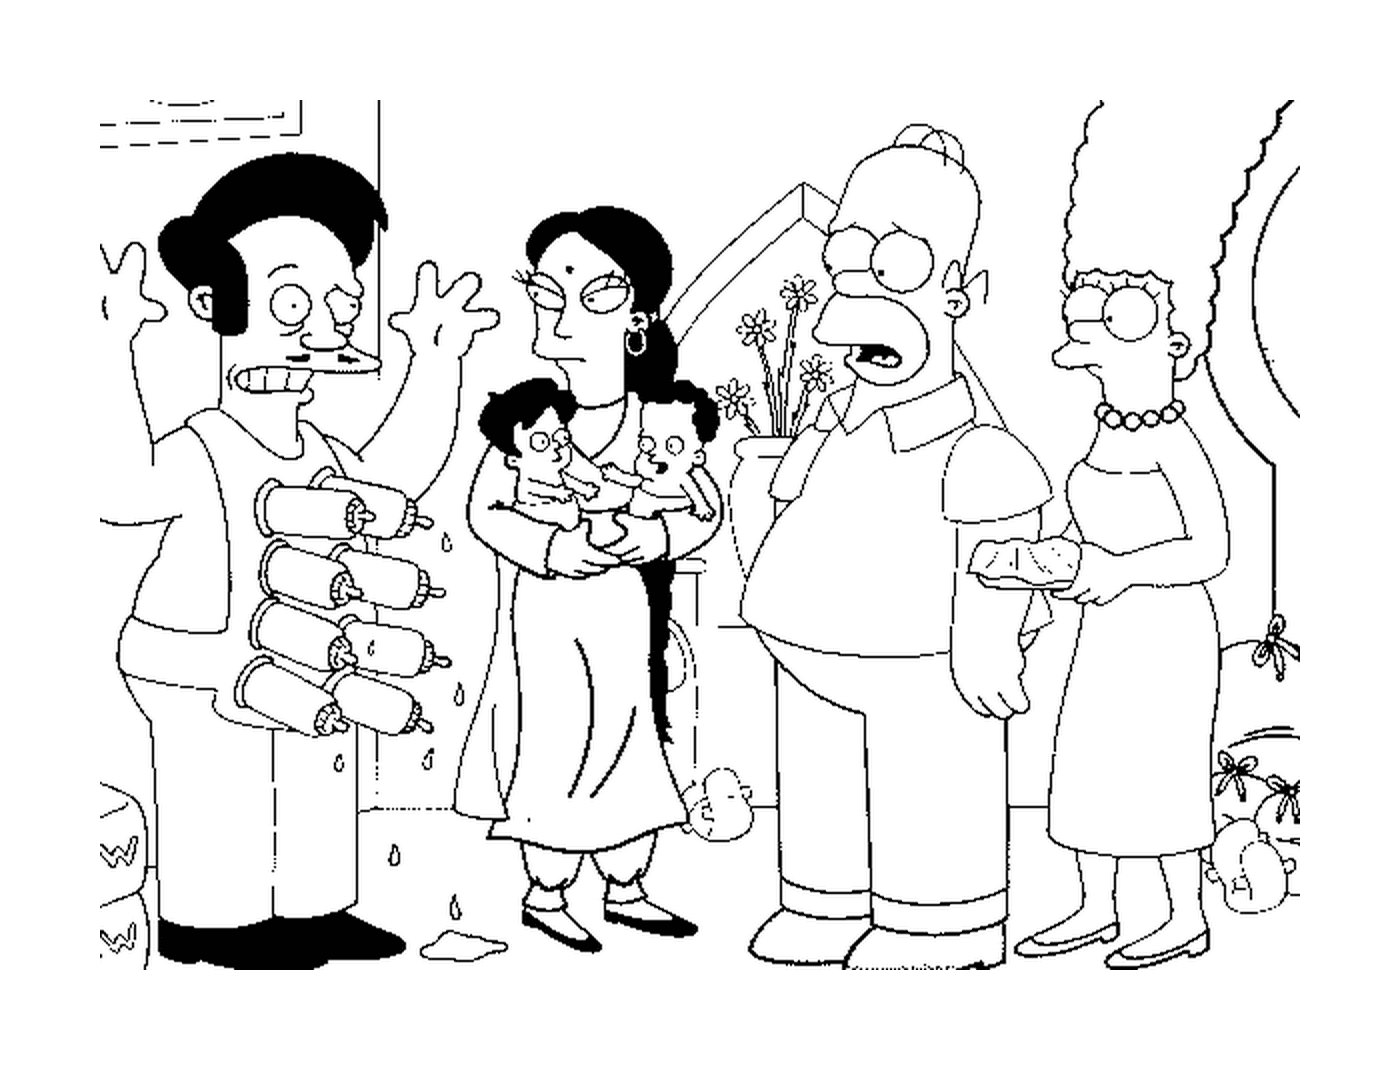  Apu with wife and children 